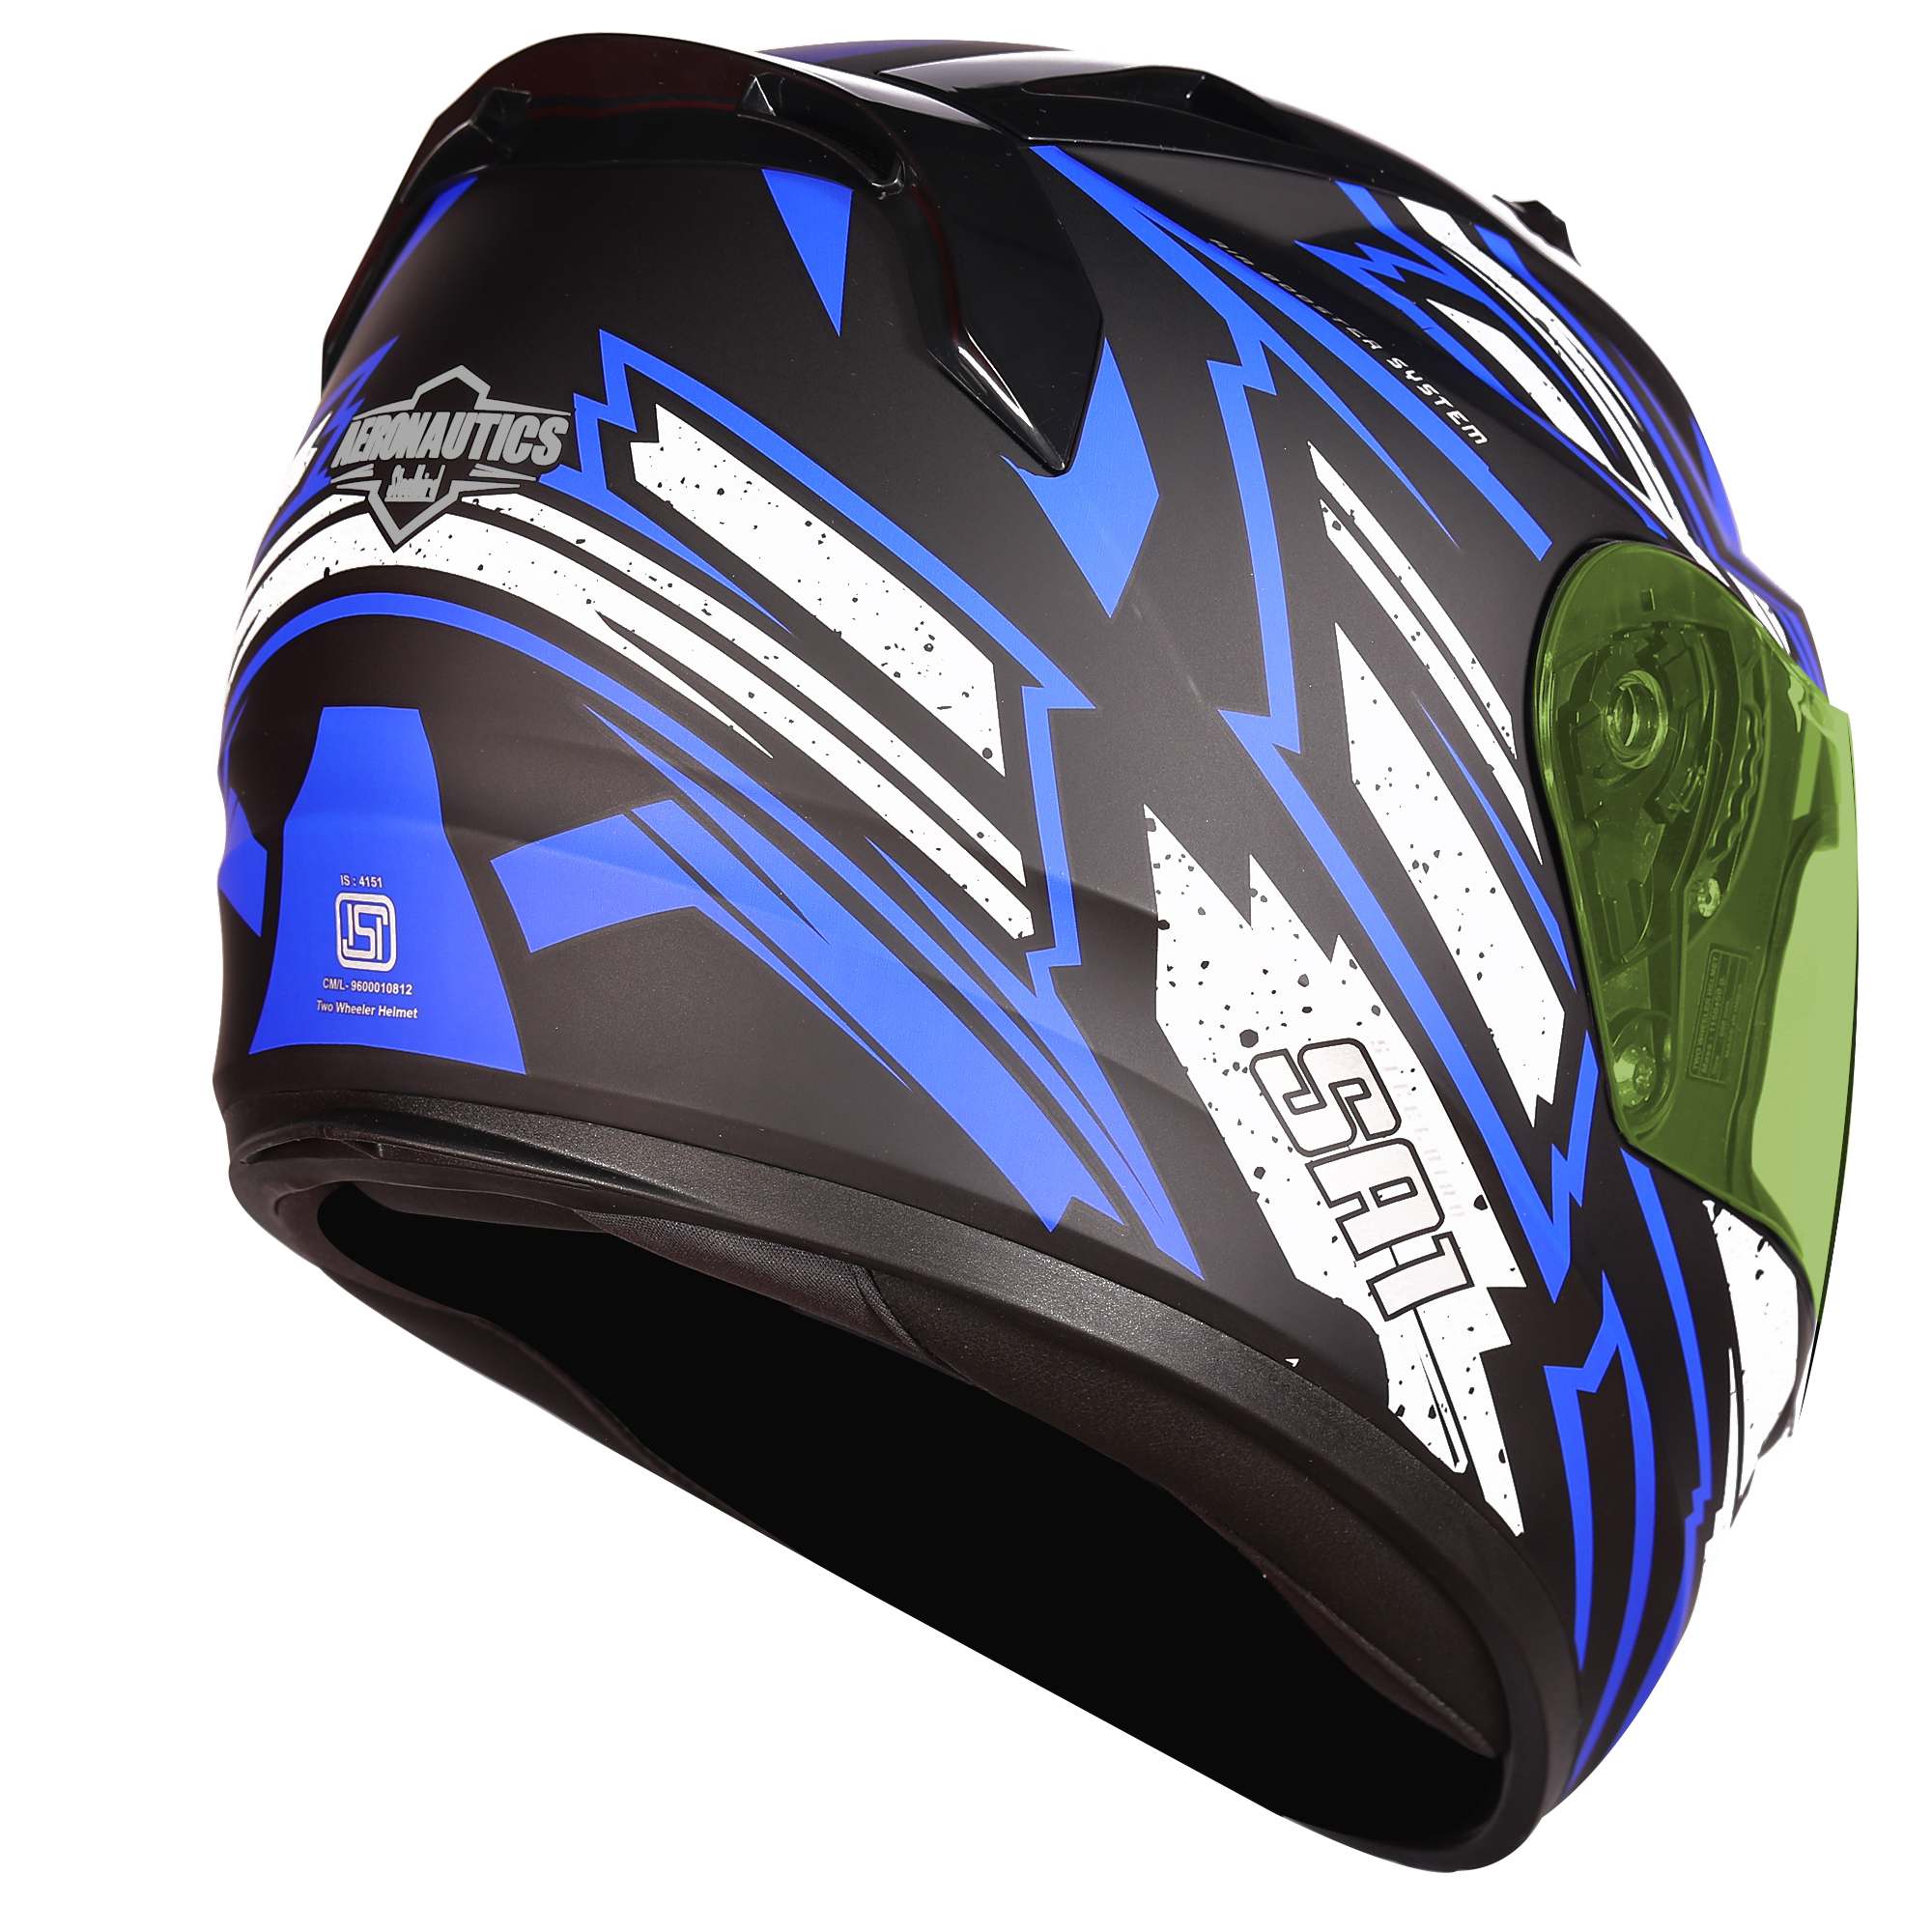 SA-1 BOOSTER MAT BLACK WITH BLUE - NIGHT VISION GREEN VISOR (WITH EXTRA CLEAR VISOR)